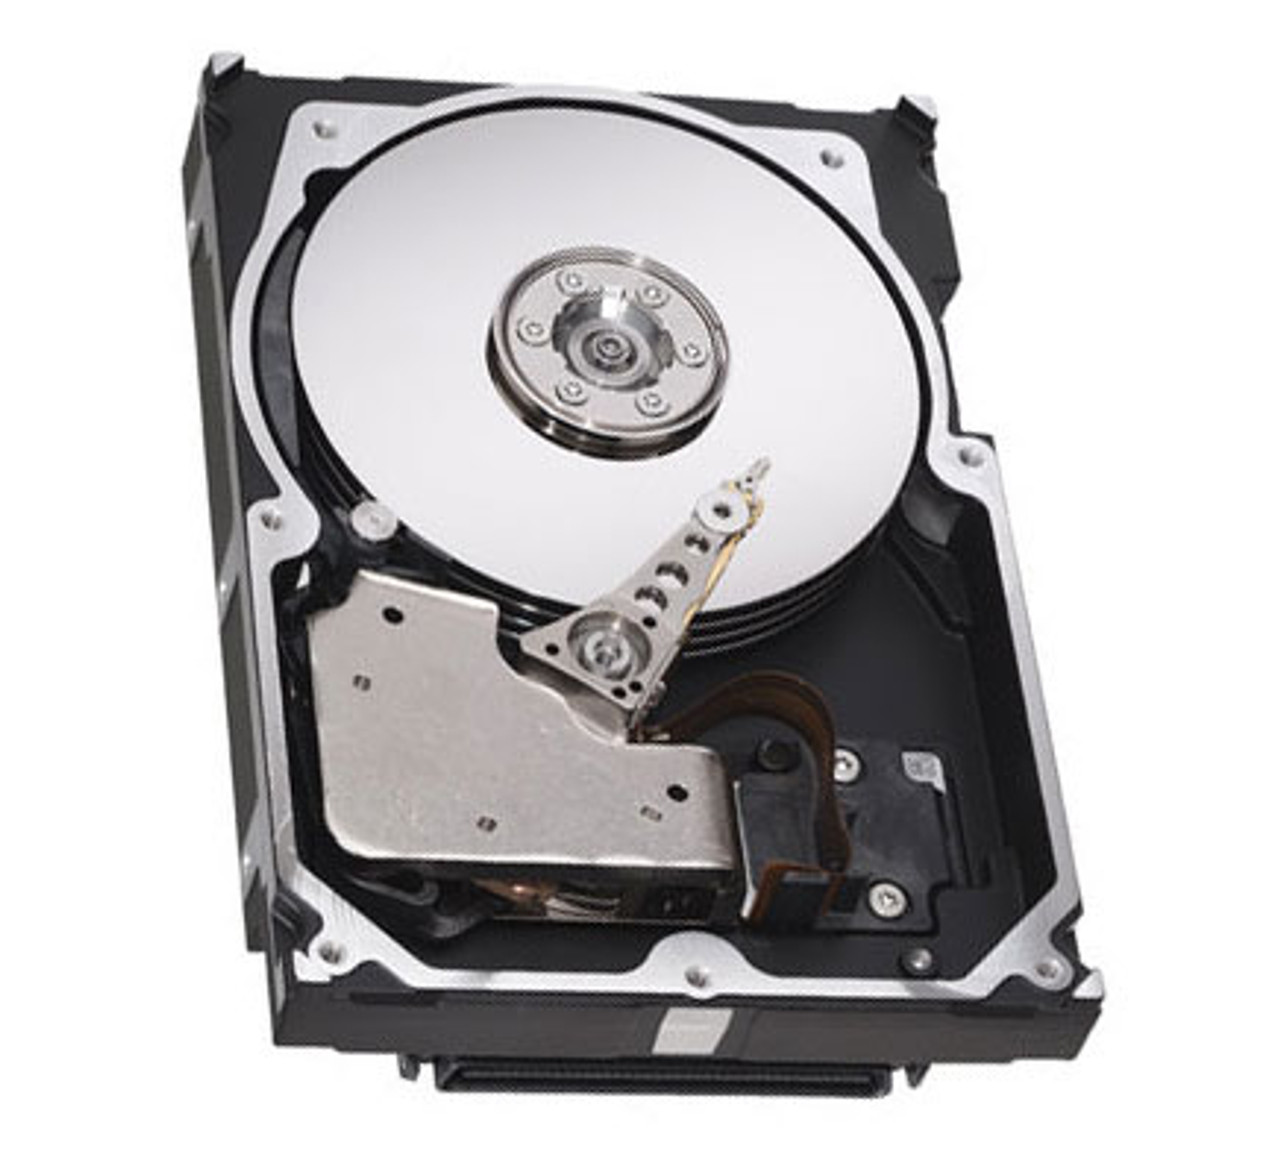 0H8799 - Dell 73GB 15000RPM SAS 3GB/s 3.5-inch Hard Drive with Tray for PowerEdge 1950